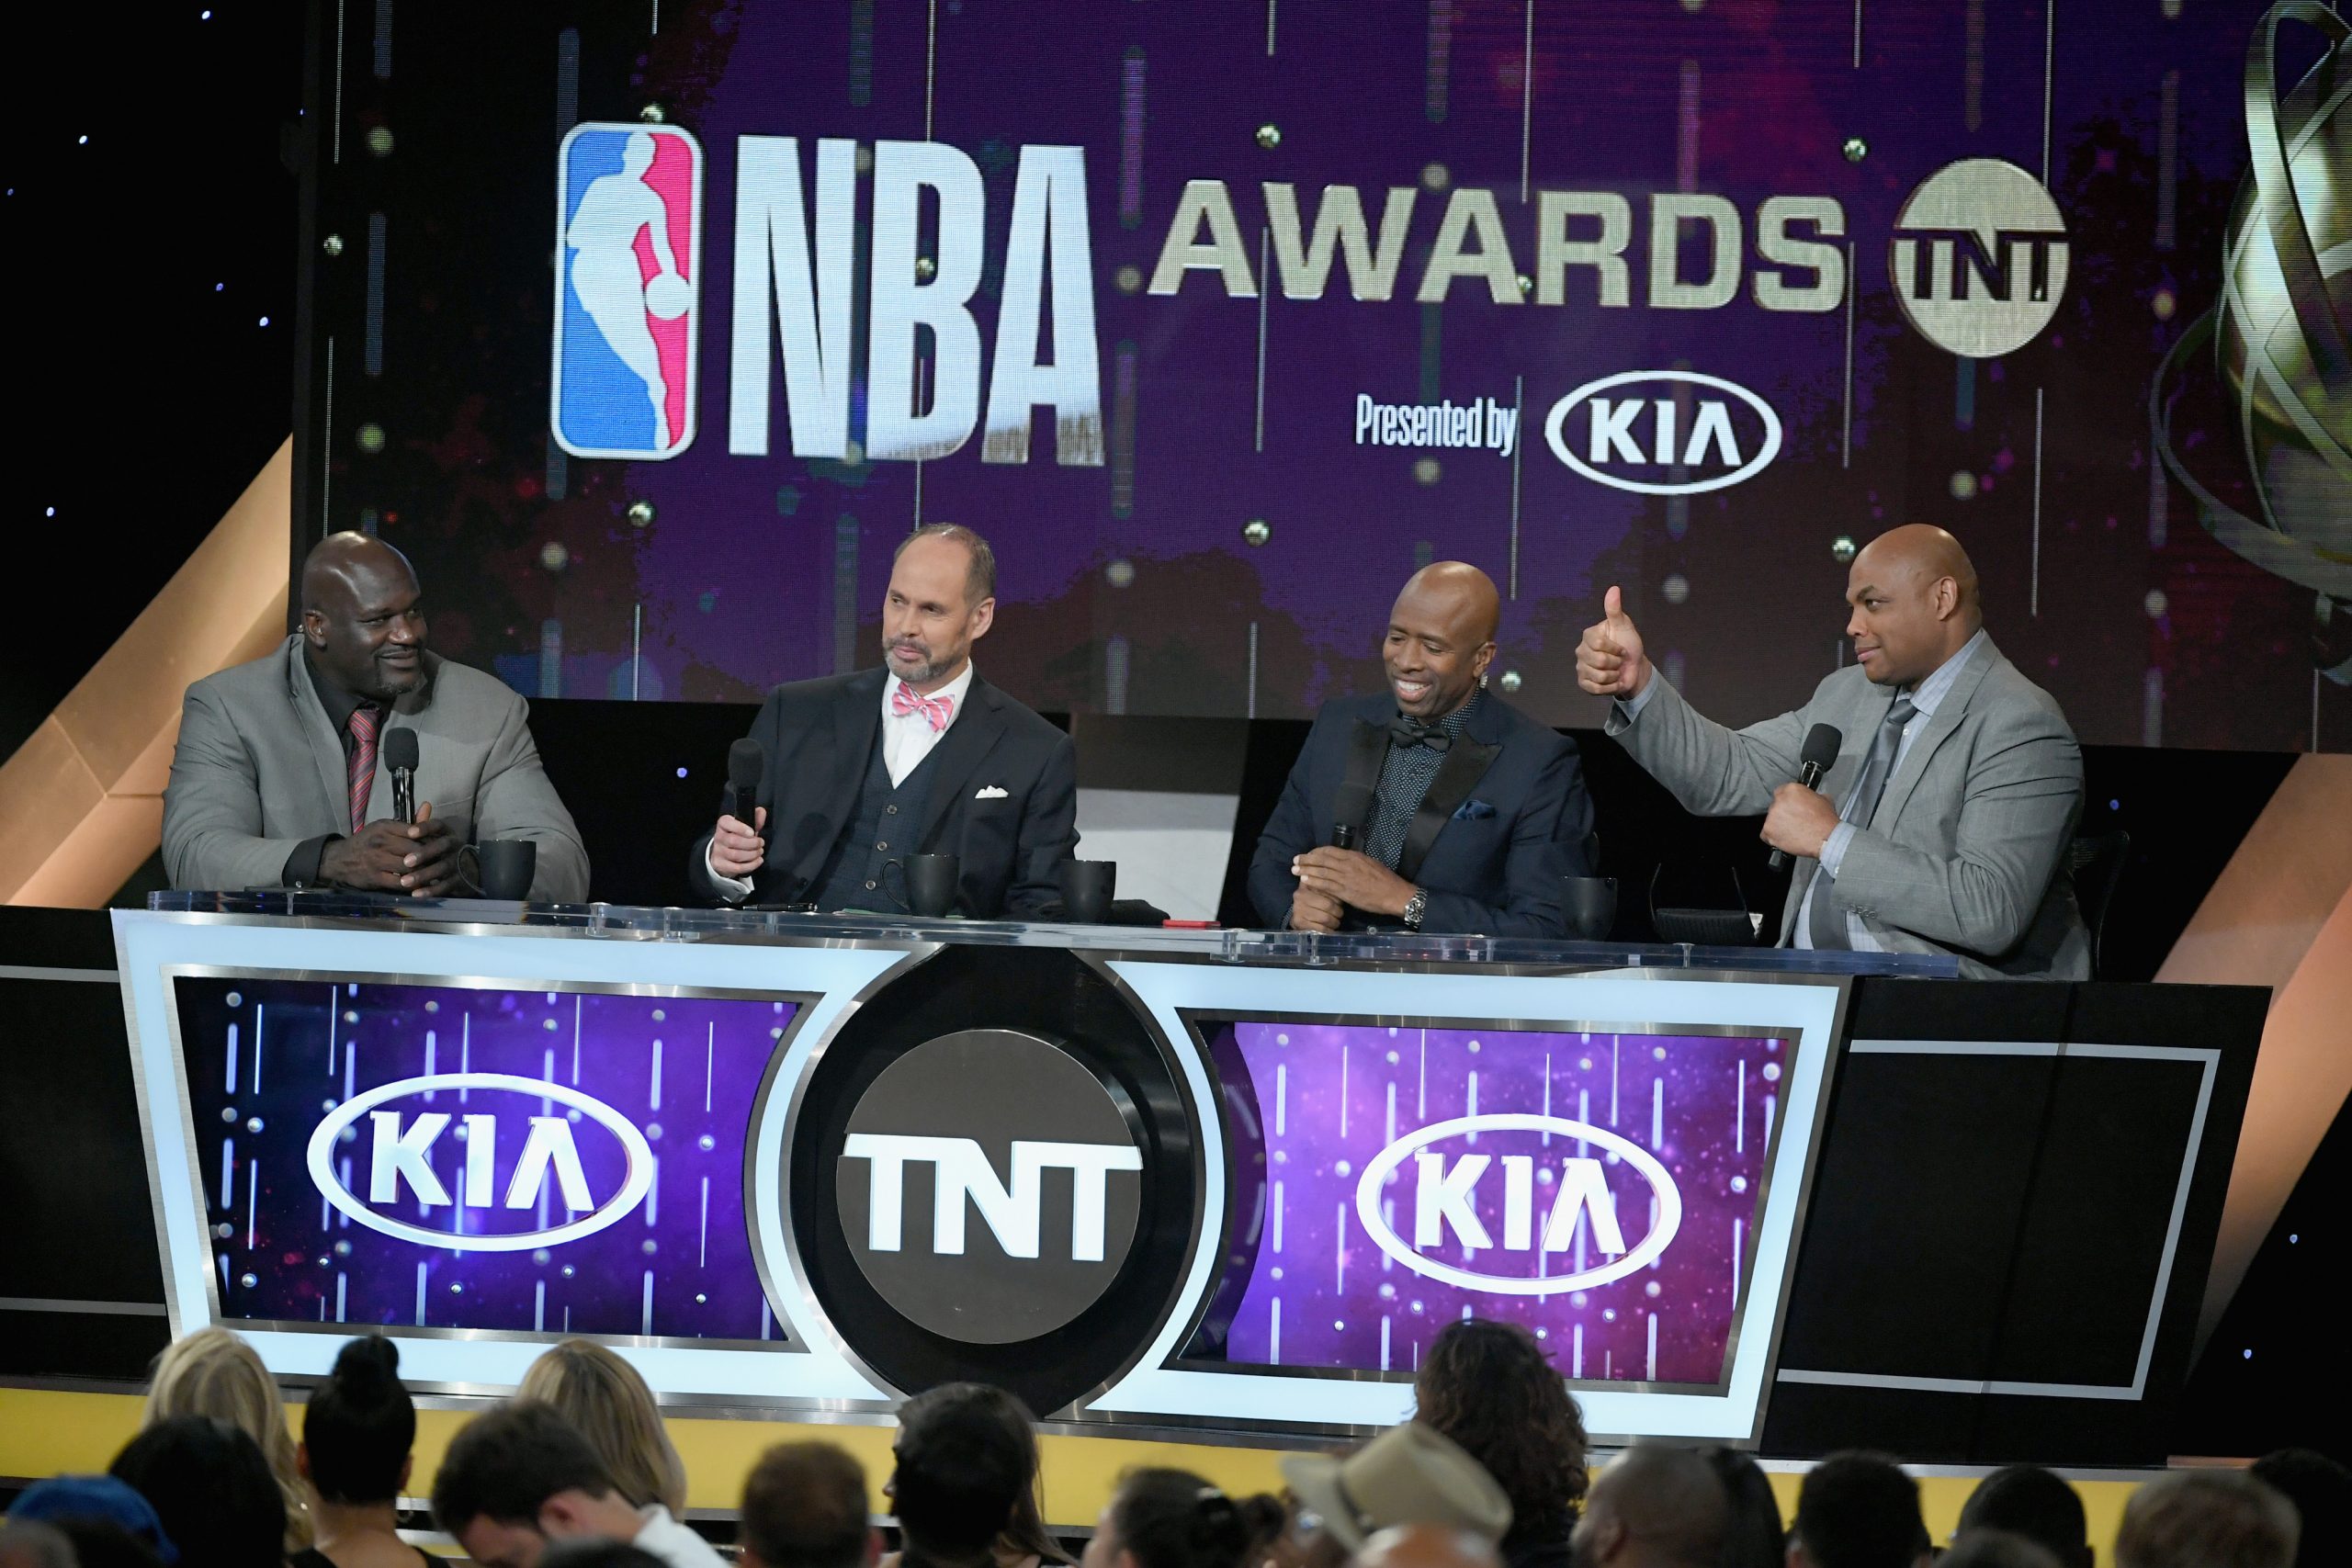 Shaquille O'Neal, Ernie Johnson Jr., Kenny Smith, and Charles Barkley speak at the 2018 NBA Awards at Barkar Hangar on June 25, 2018 in Santa Monica, California. | Kevin Winter/Getty Images for Turner Sports